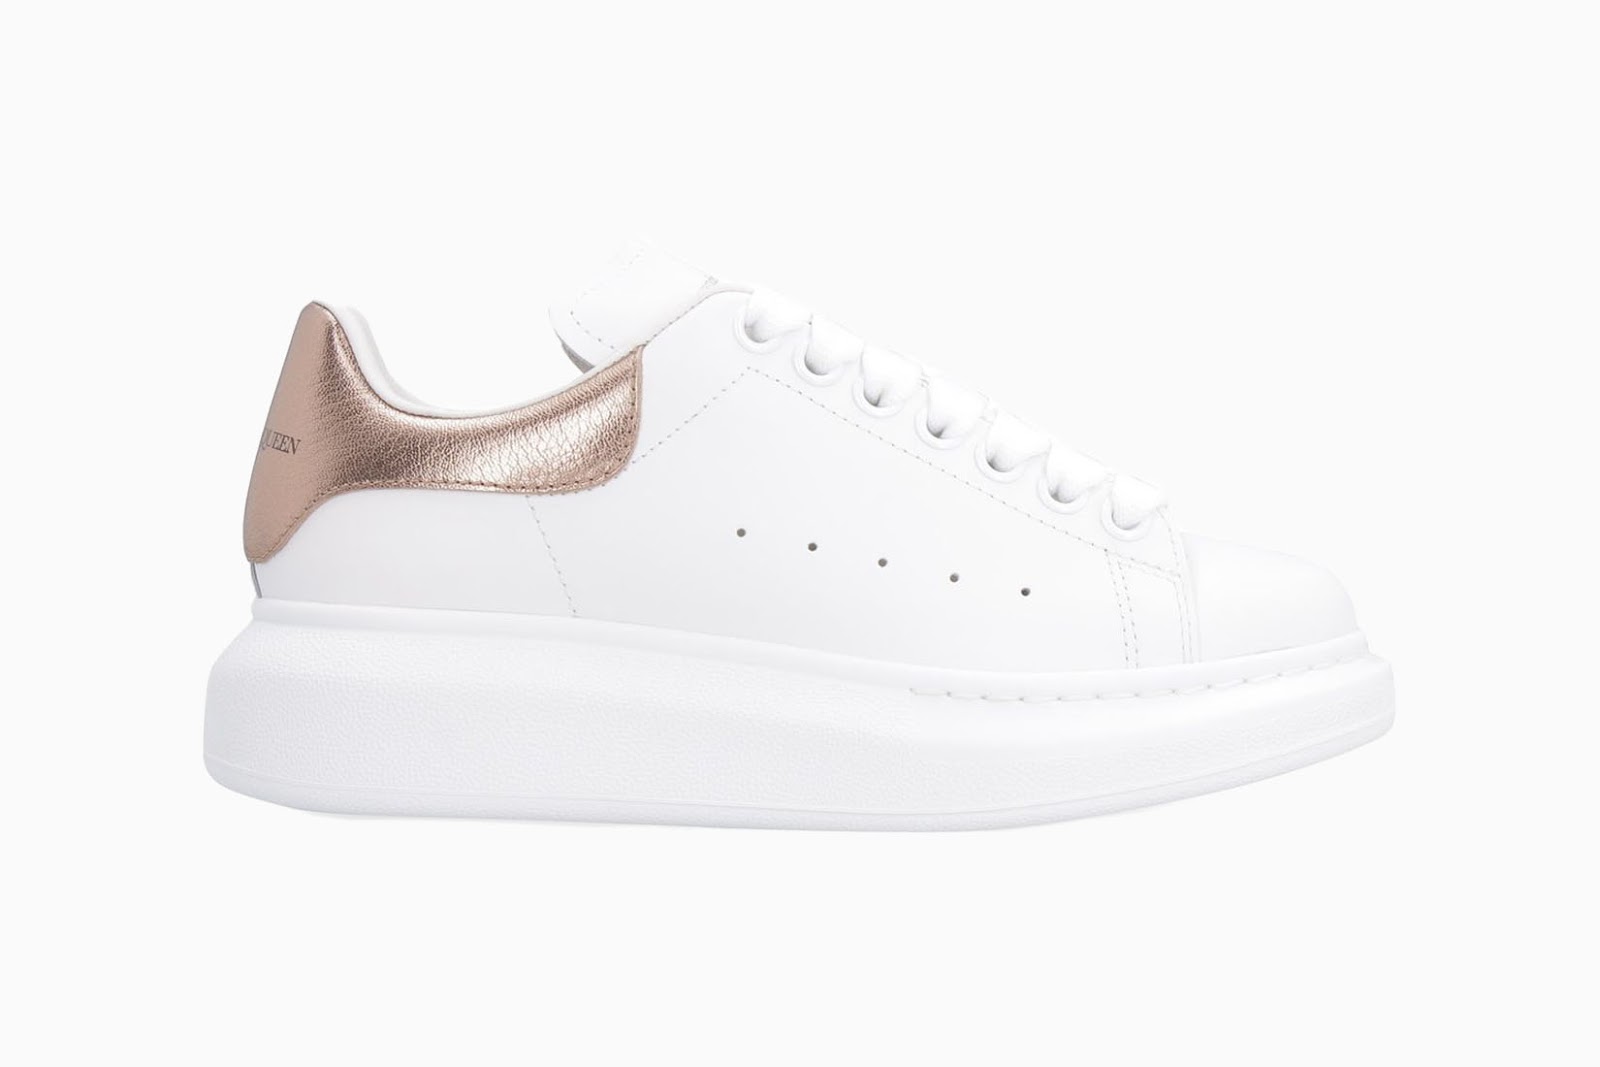 This pair of sneakers is best for polished minimalism on a daily basis. | Photo from Alexander McQueen